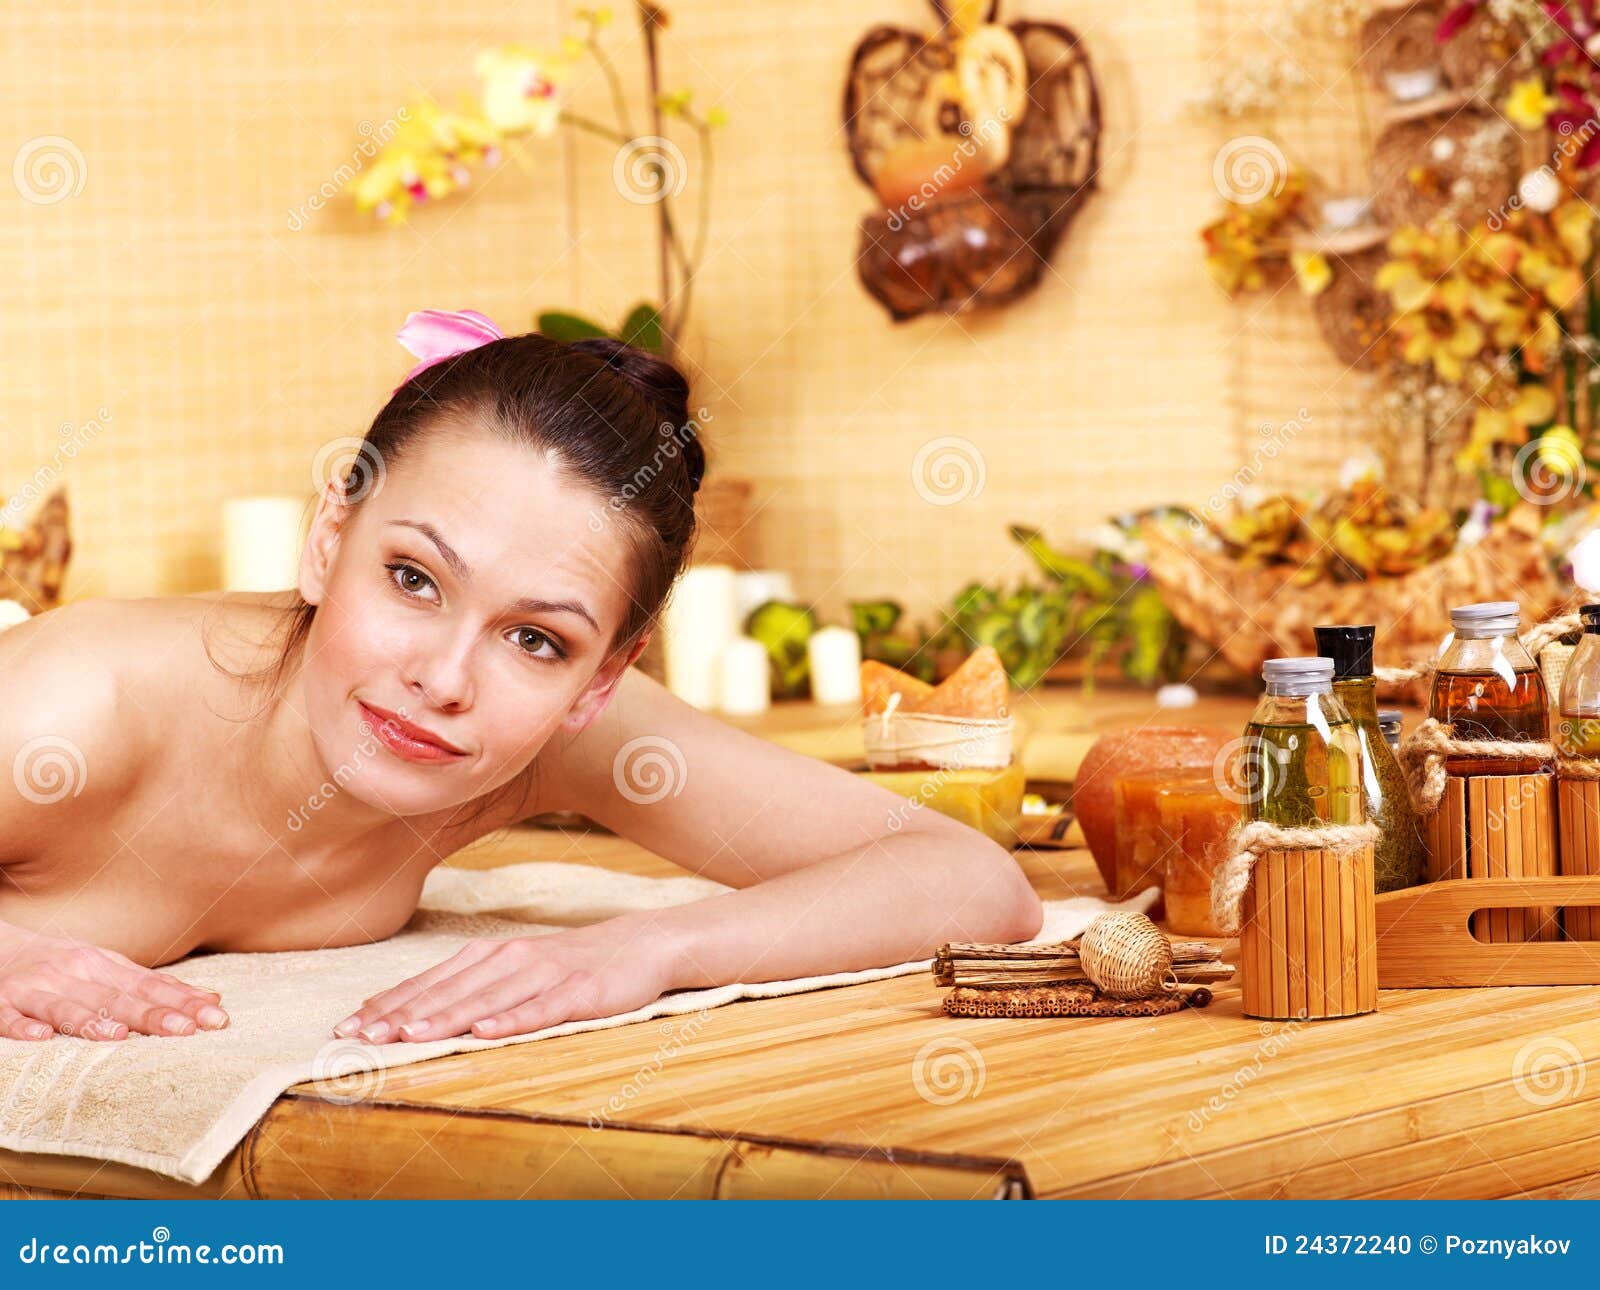 Woman Getting Massage In Bamboo Spa Stock Photo Image Of Beauty Back